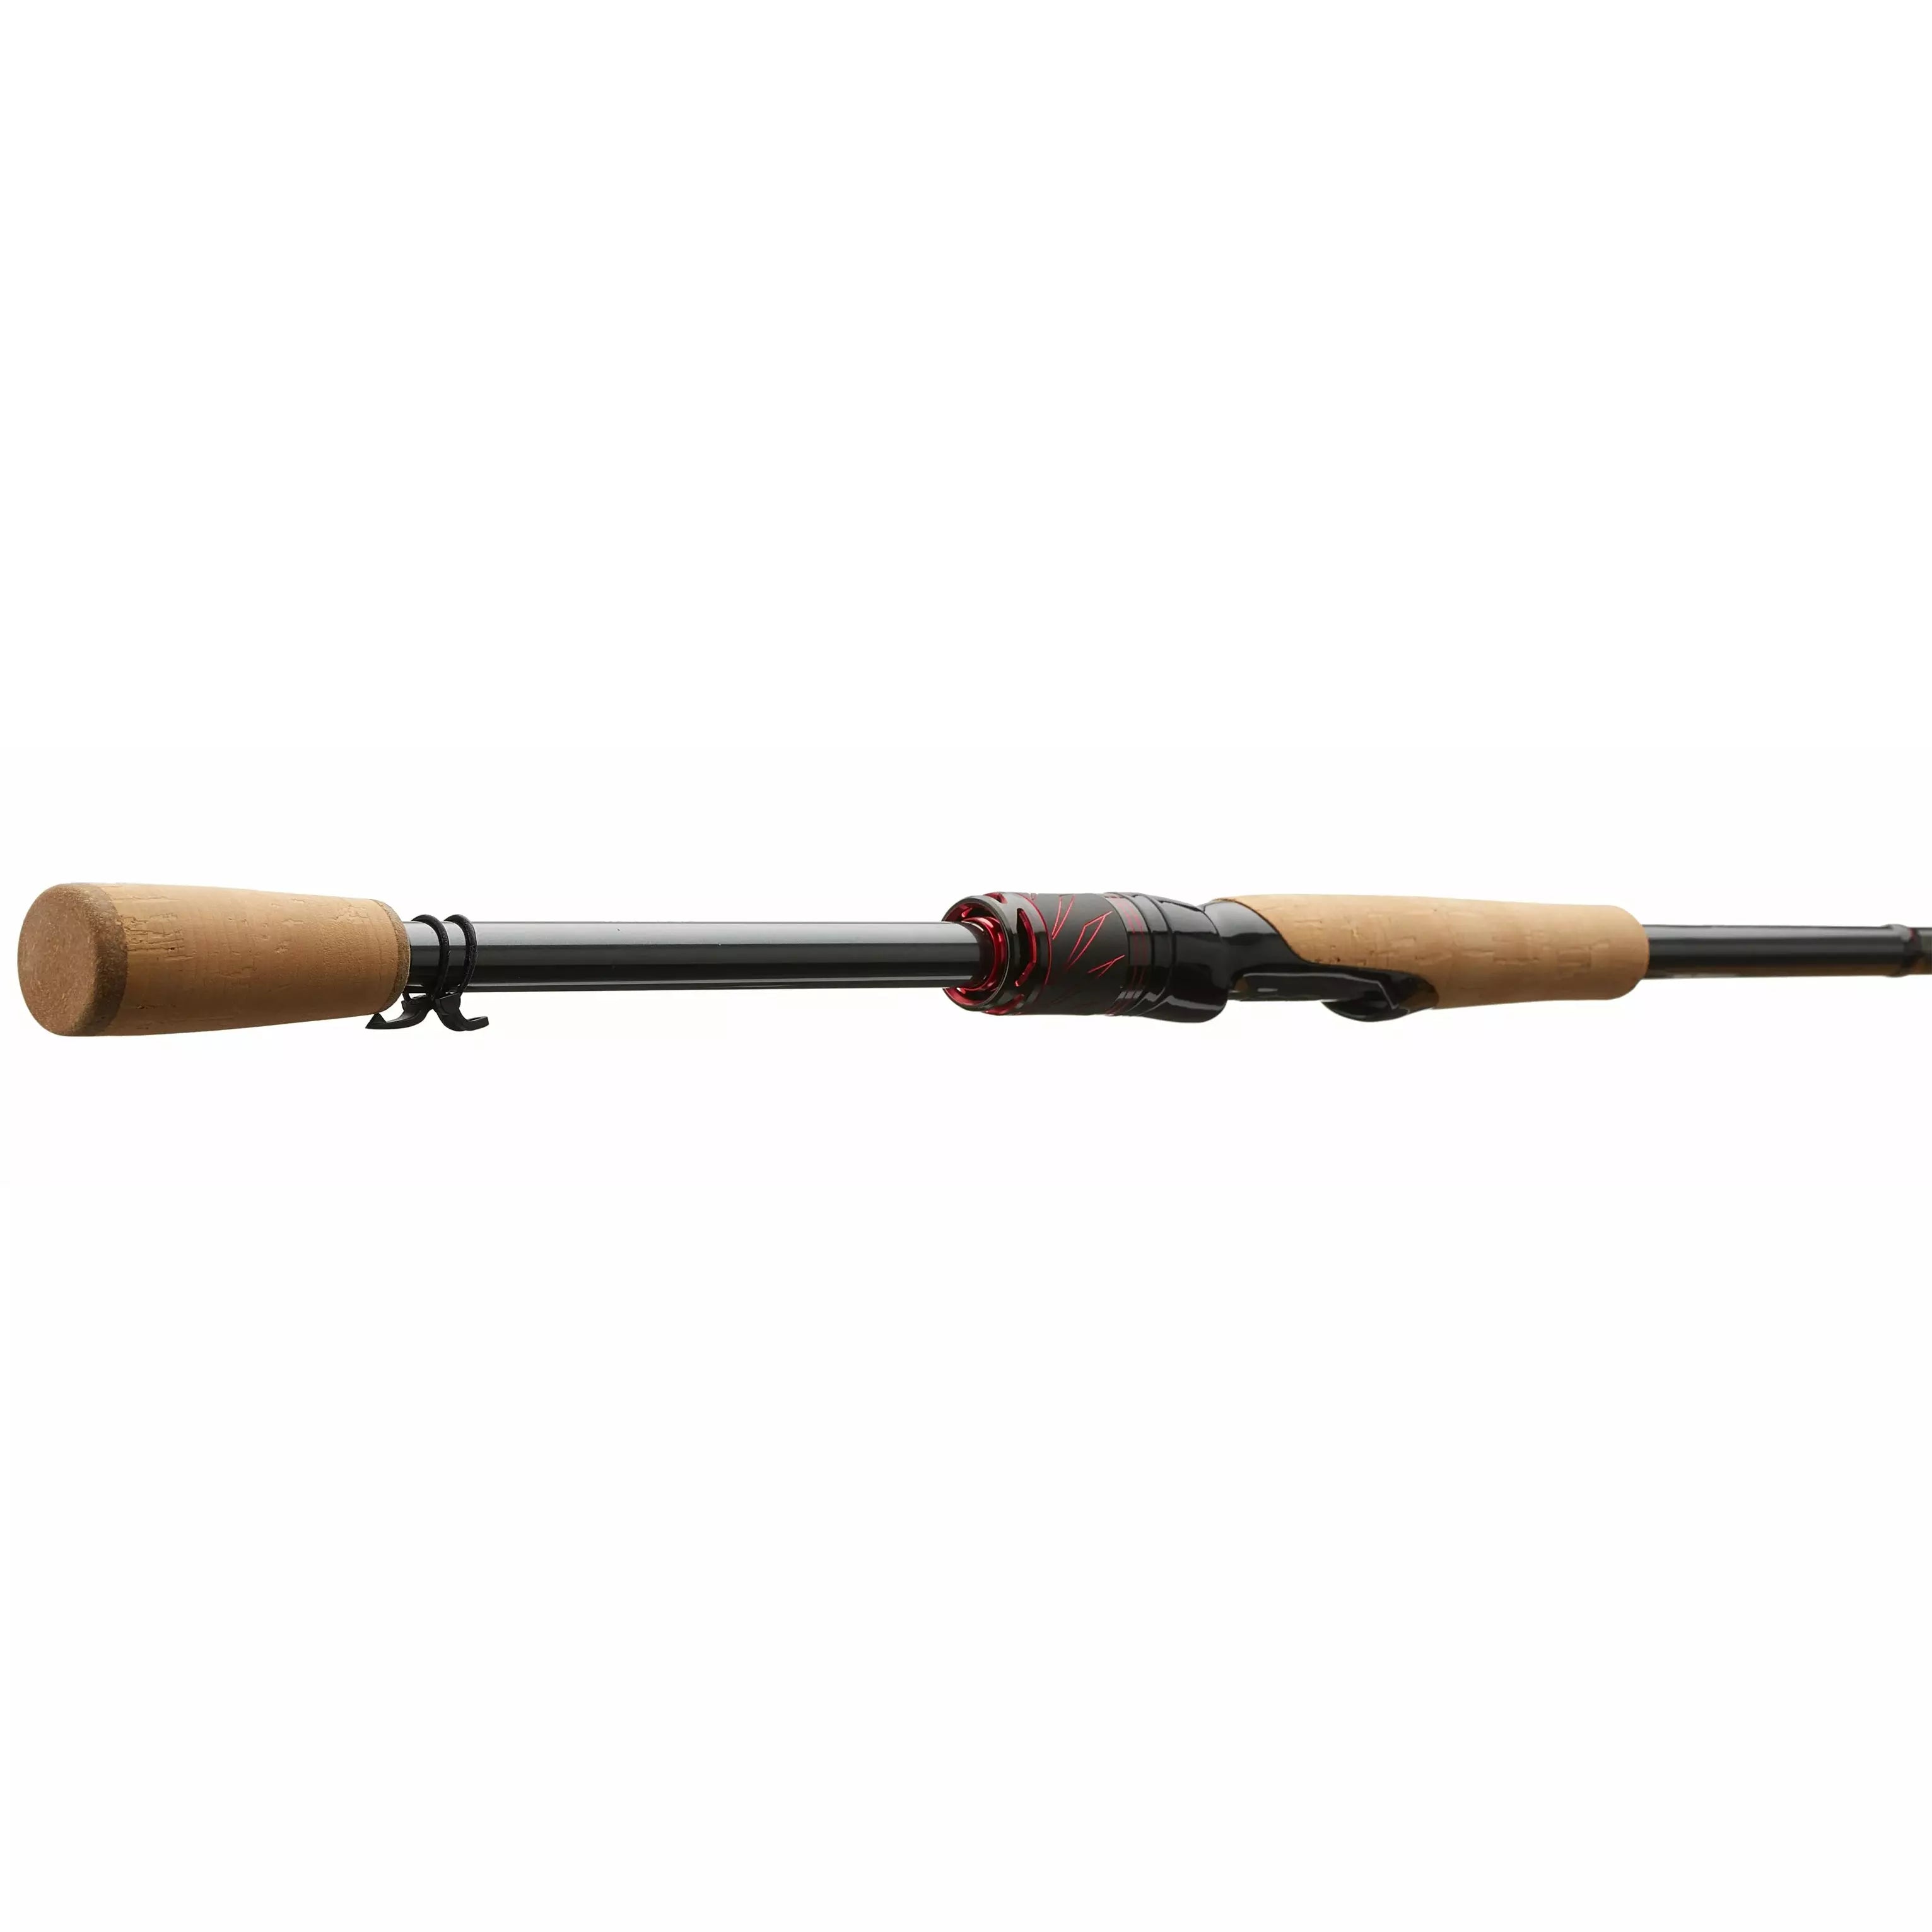 Bass Shack - NEW GREEN DAIWA RG rods now in stock 7'6 and